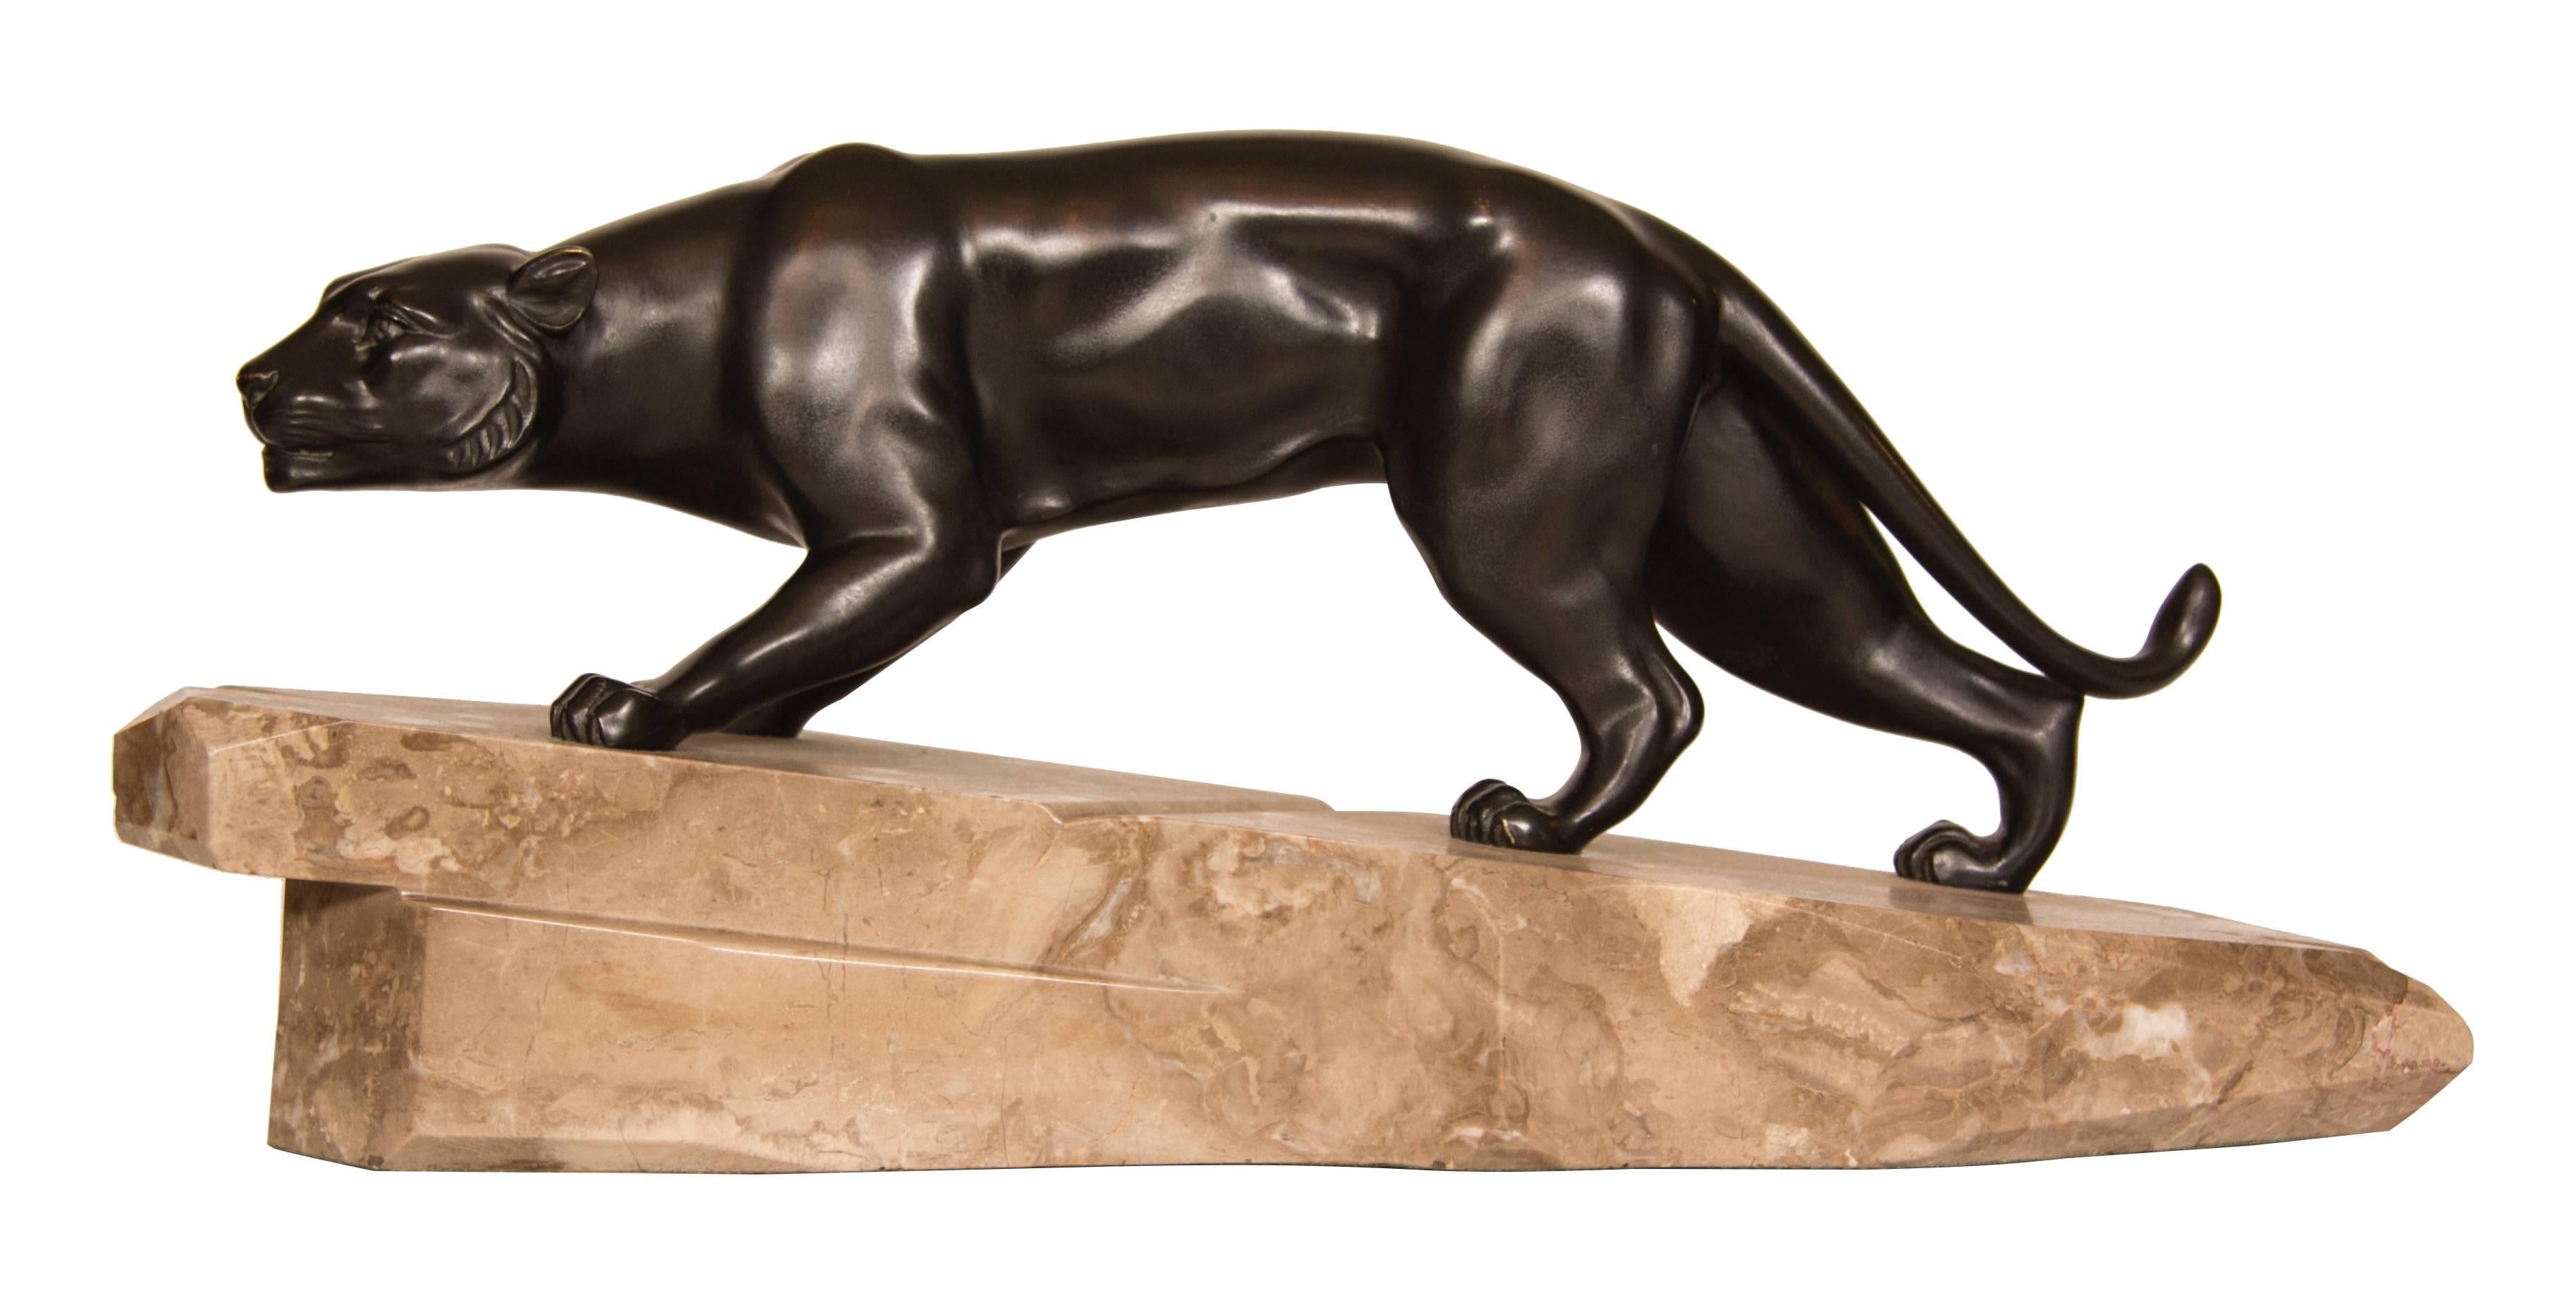 An Art Deco bronze model of a prowling panther on a mountain rock.
Signed in the marble J Brault
Measure: 25 cm H x 56 cm W x 17 cm D
French, circa 1930.